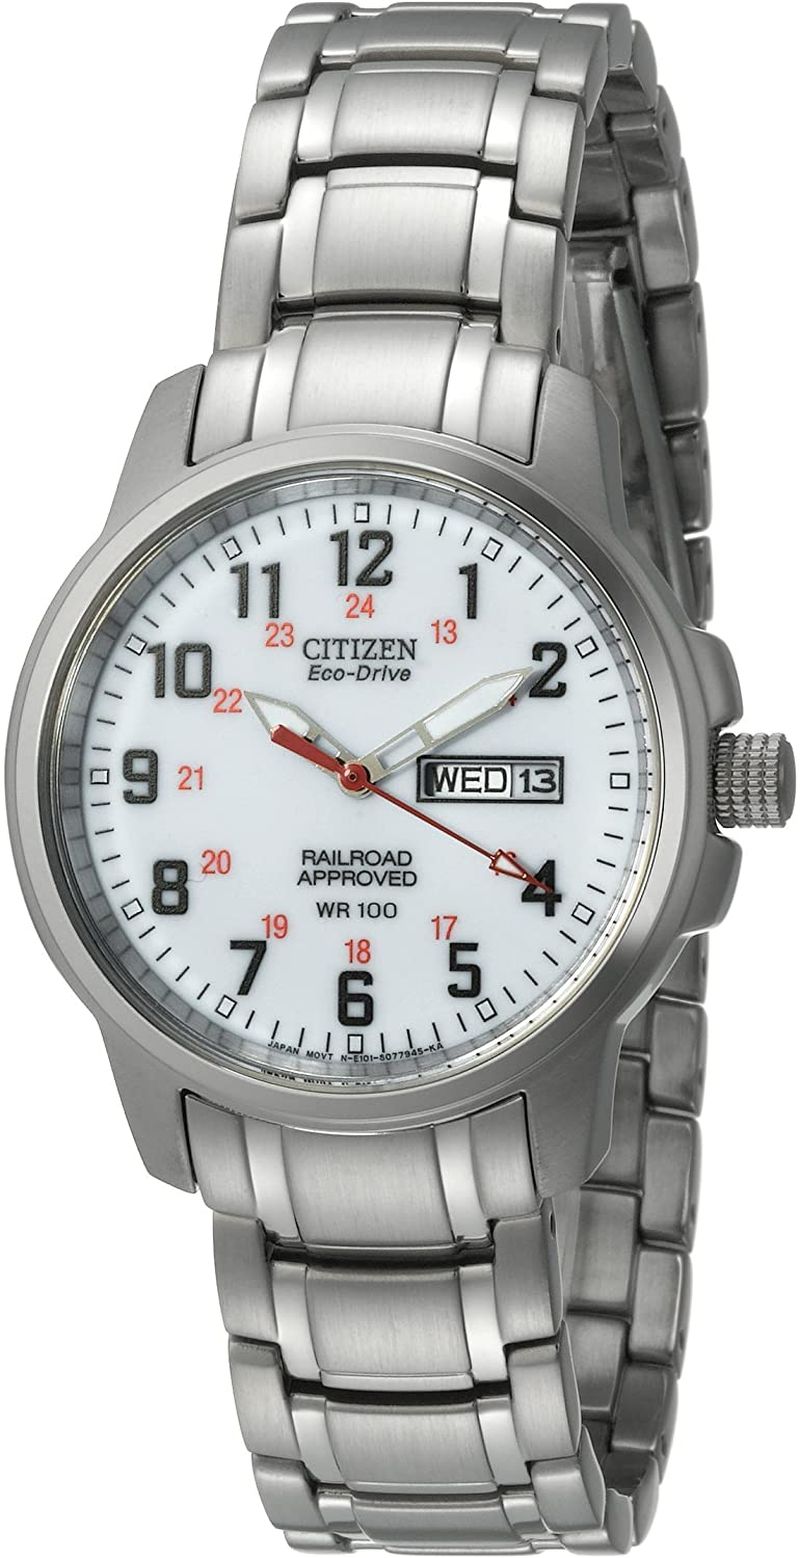 Citizen Men’s BM8180-54A Eco-Drive Railroad Watch in Stainless Steel